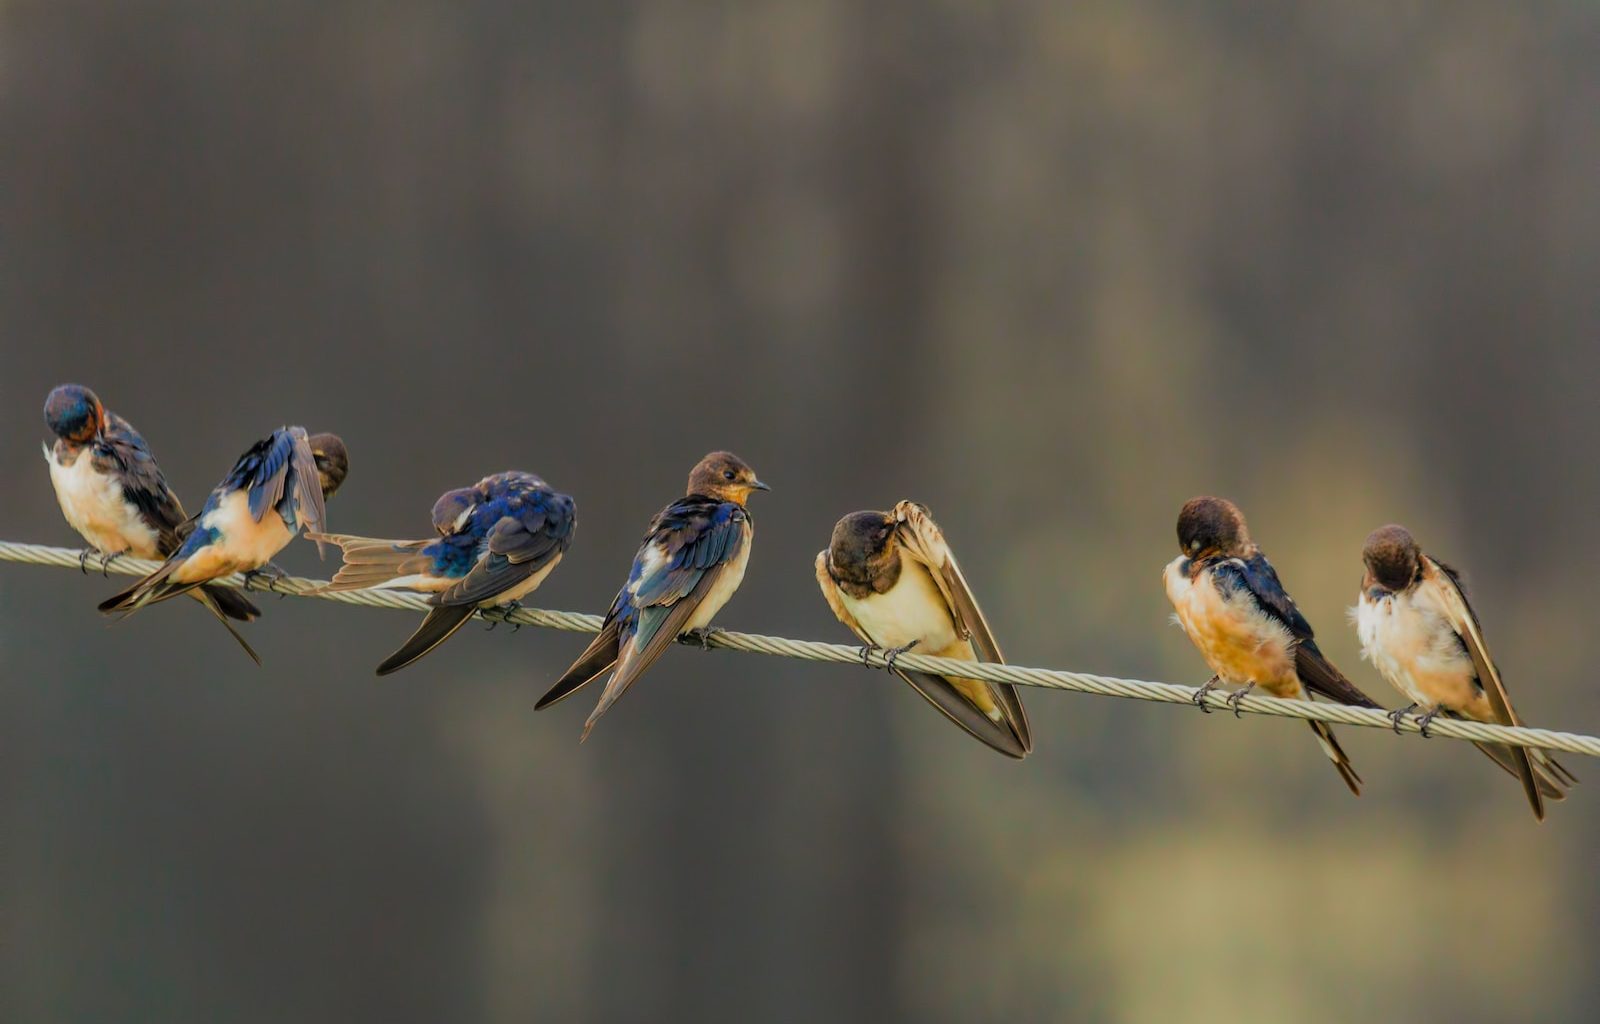 shallow focus photography of seven birds standing on gray cable